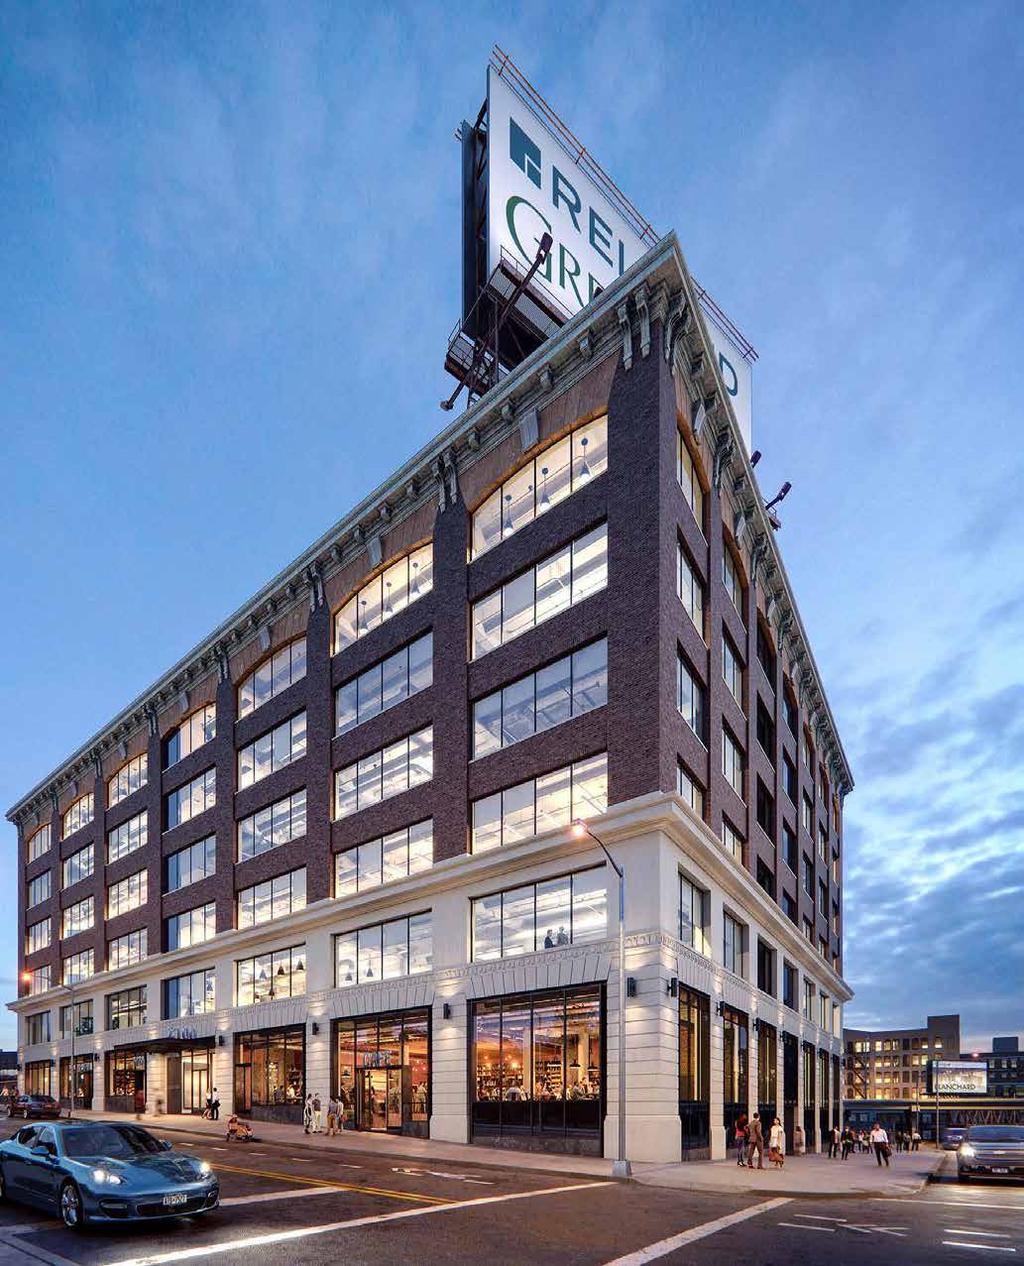 is a seven-story, 130,000 square foot, commercial building located in the heart of the Hunter s Point neighborhood of Long Island City at the South East Corner of 21st Street